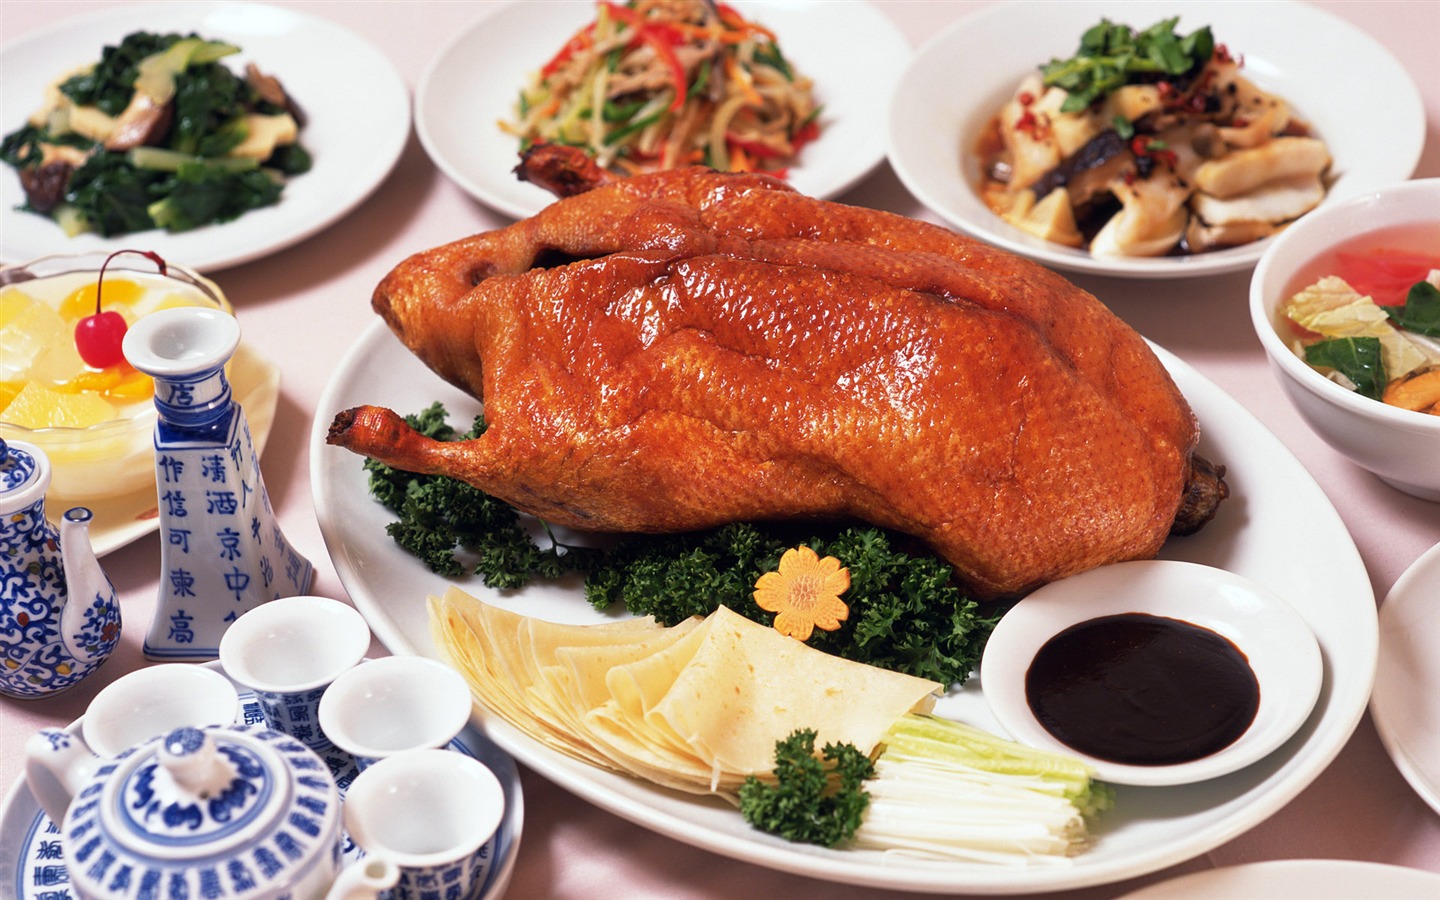 Chinese food culture wallpaper (2) #1 - 1440x900